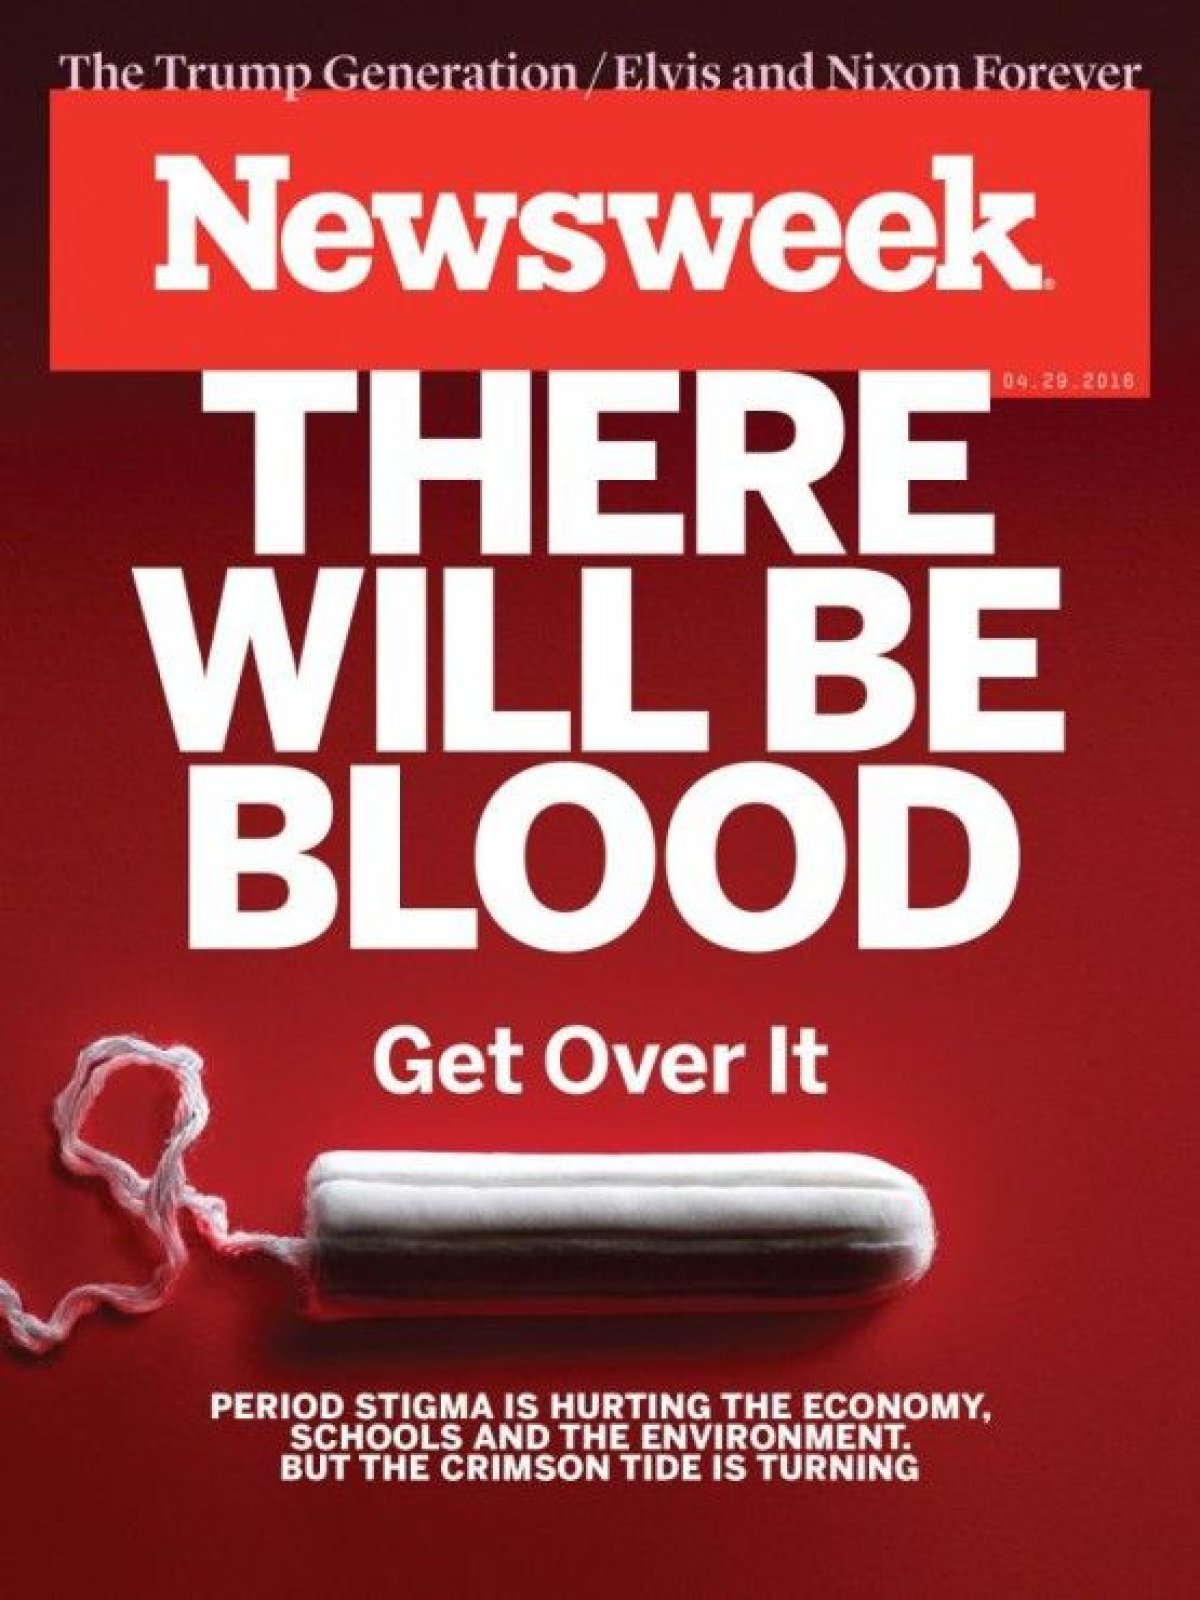 NewsweekCover_Blood-555x740